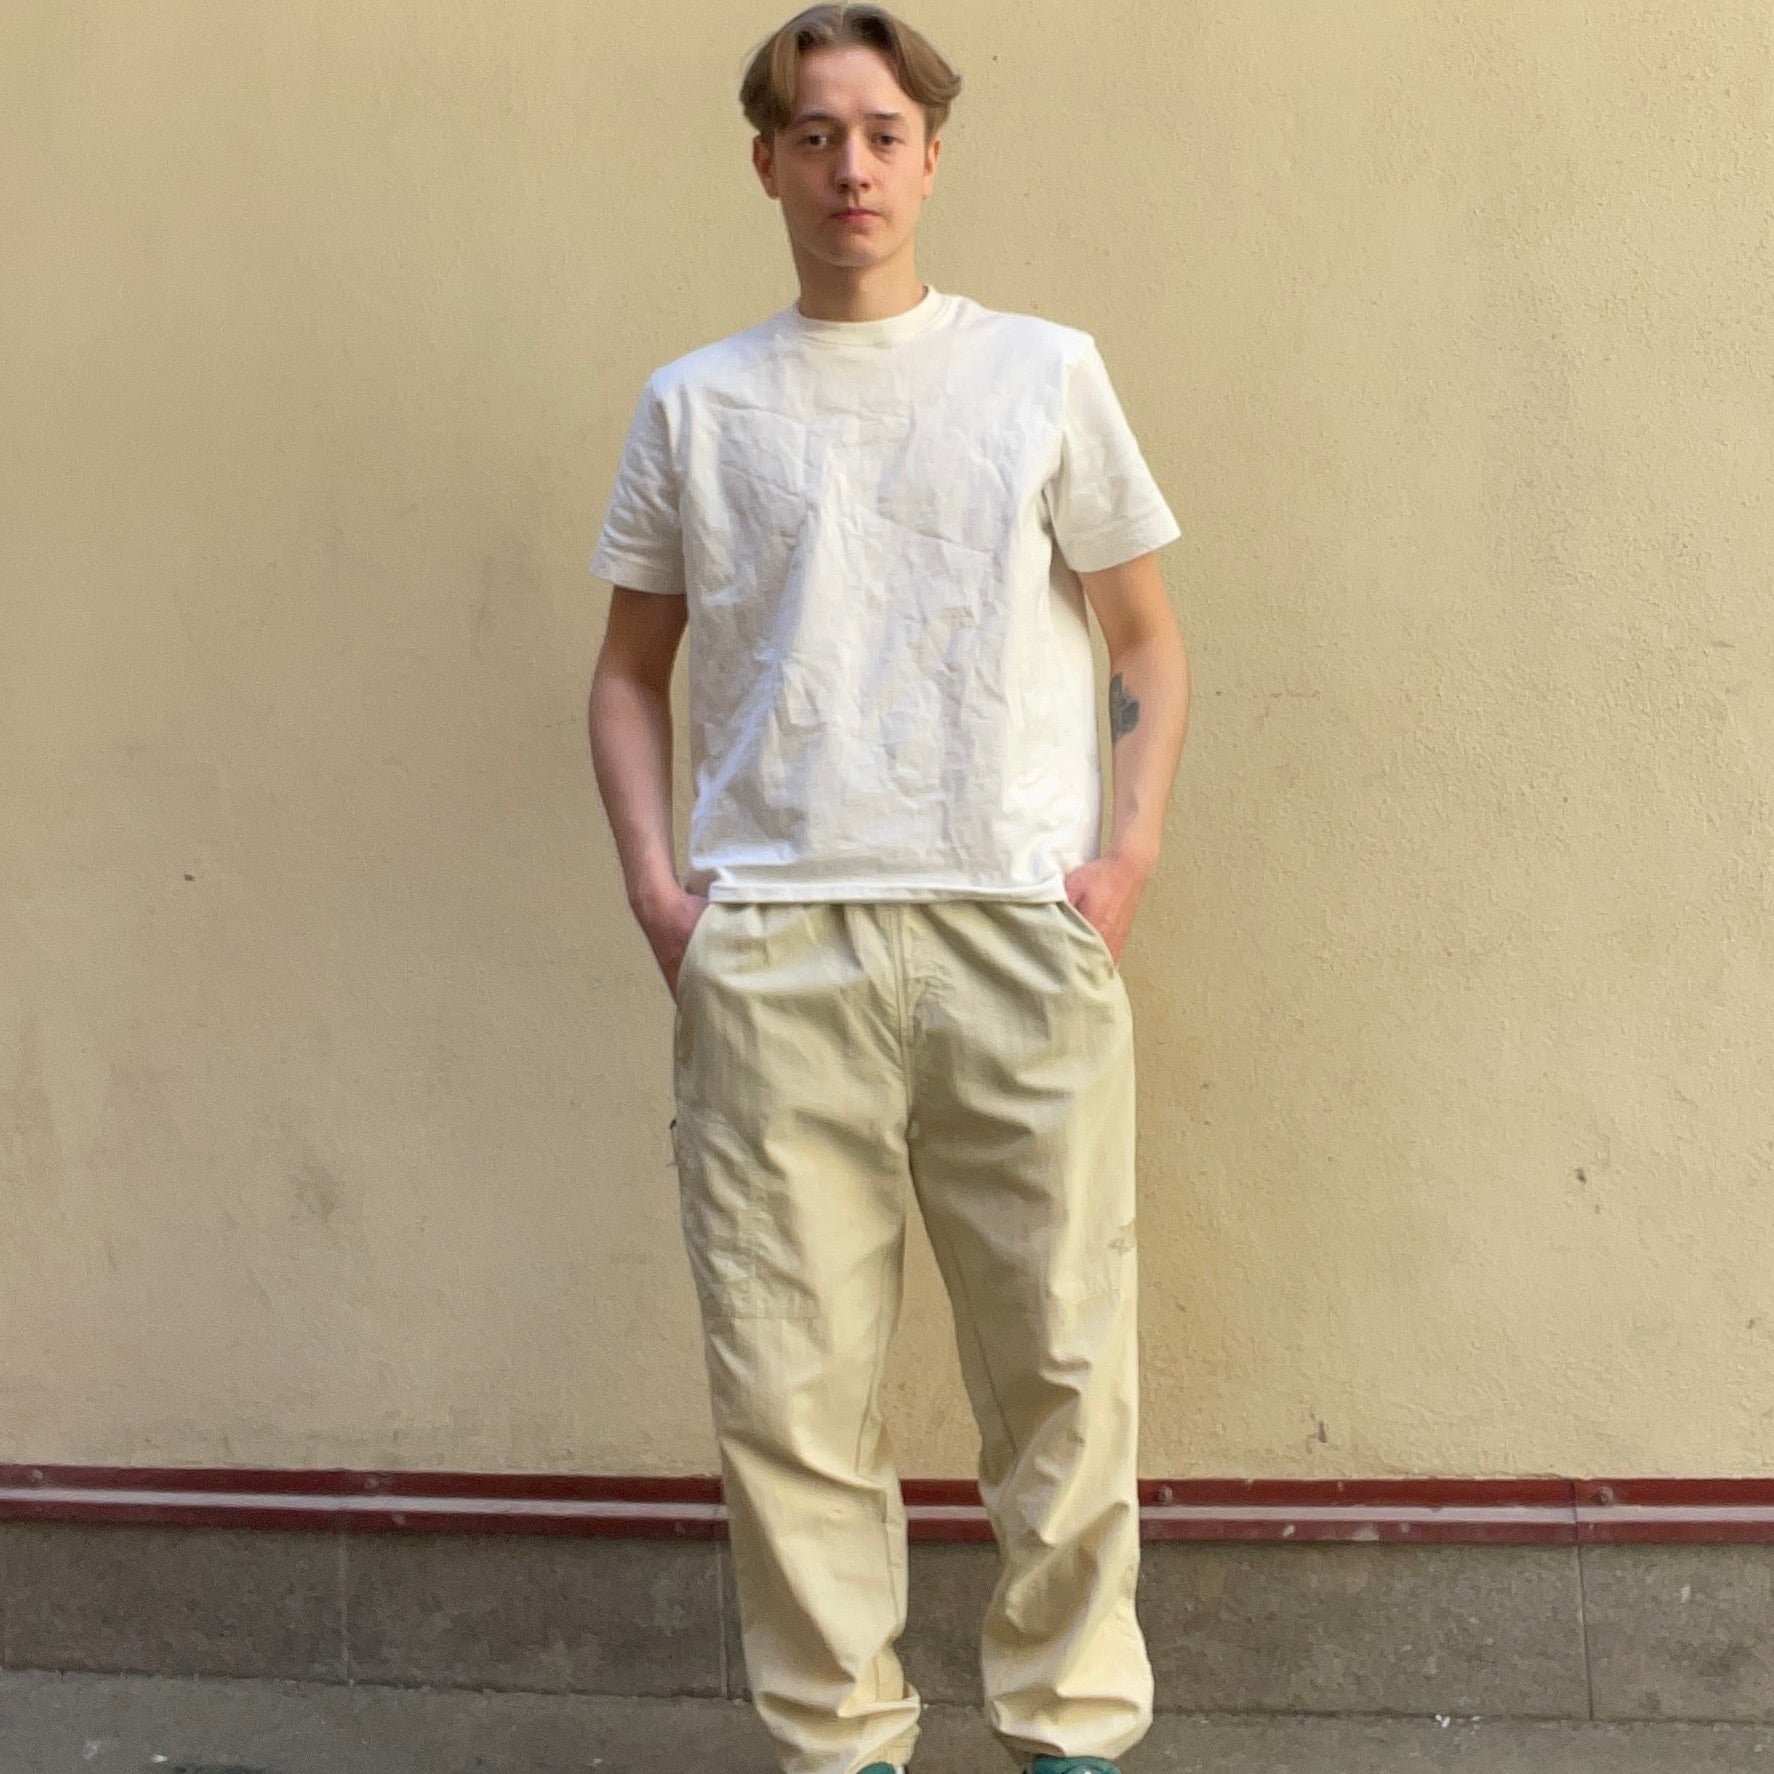 The North Face Light Weight Beige Pants